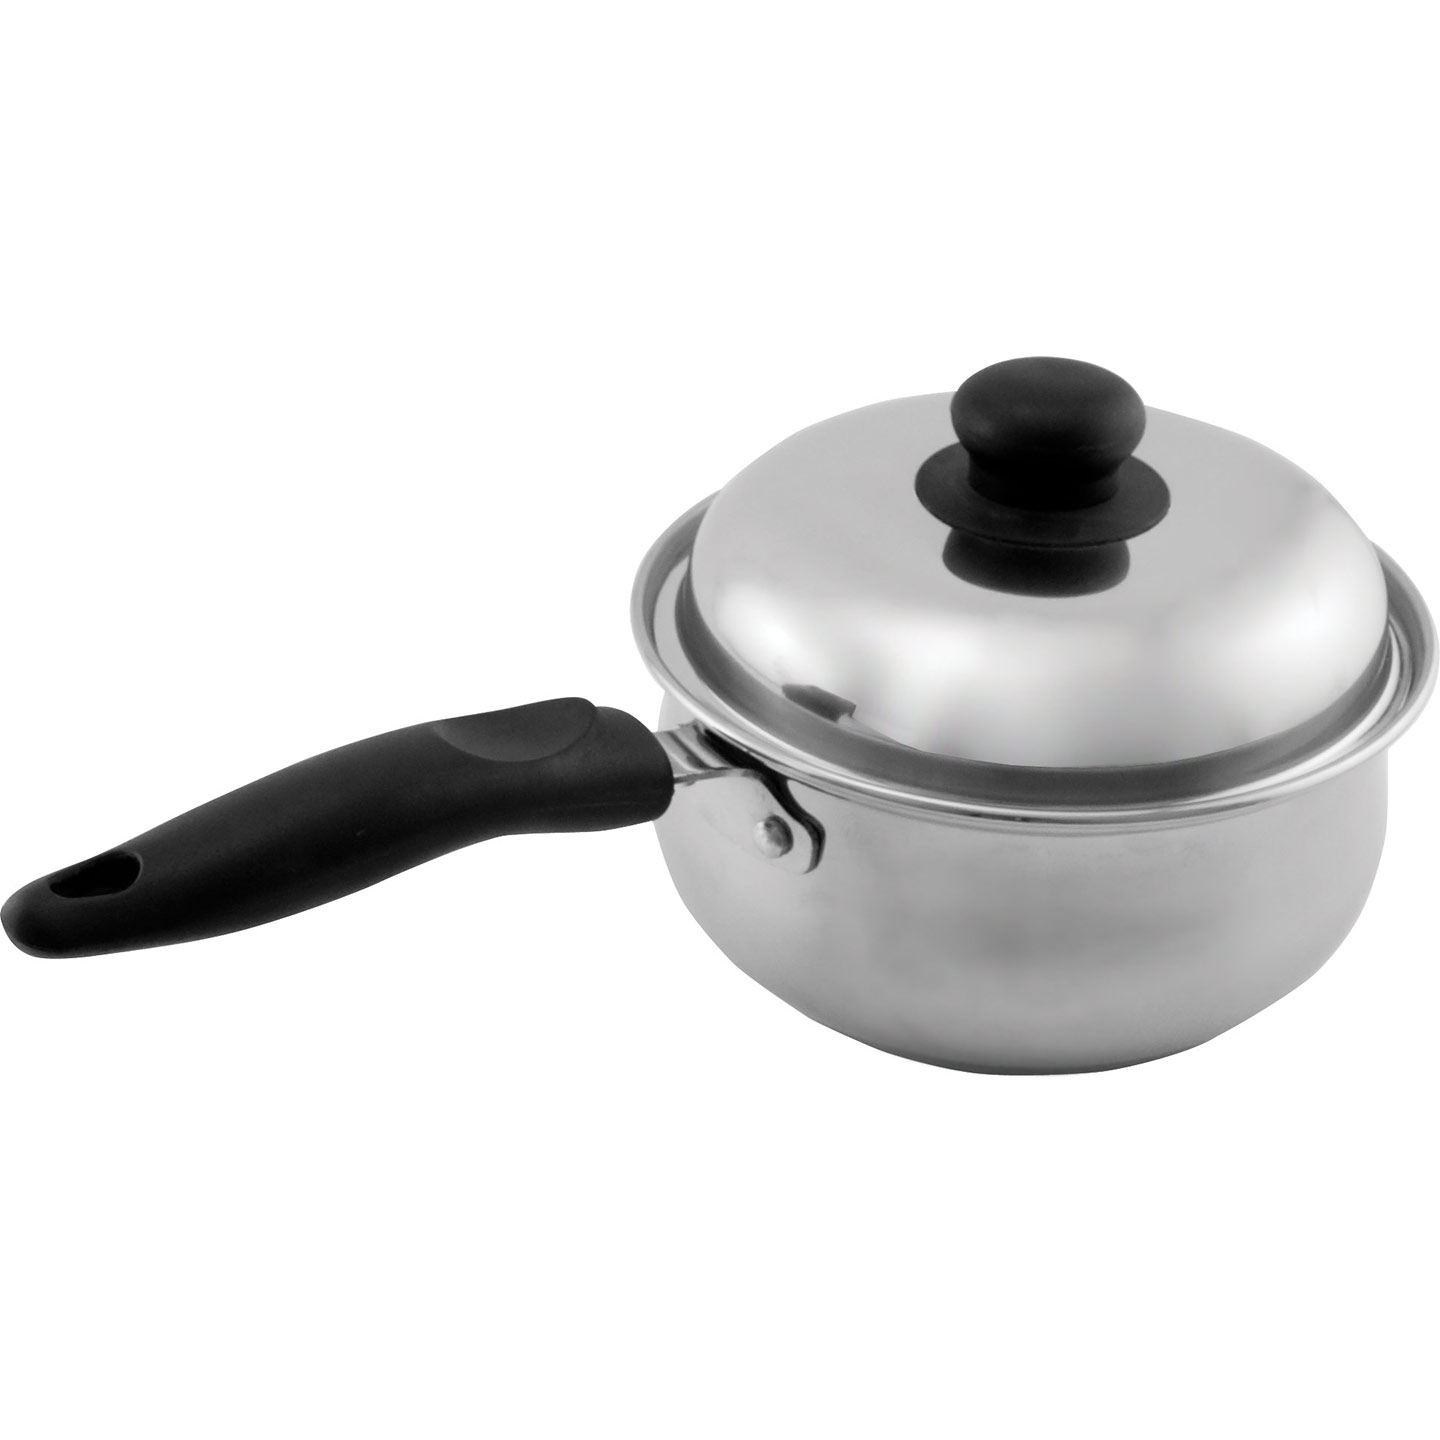 Empire Classic Stainless - 2.5 Qt Saucepan w/ Lid 